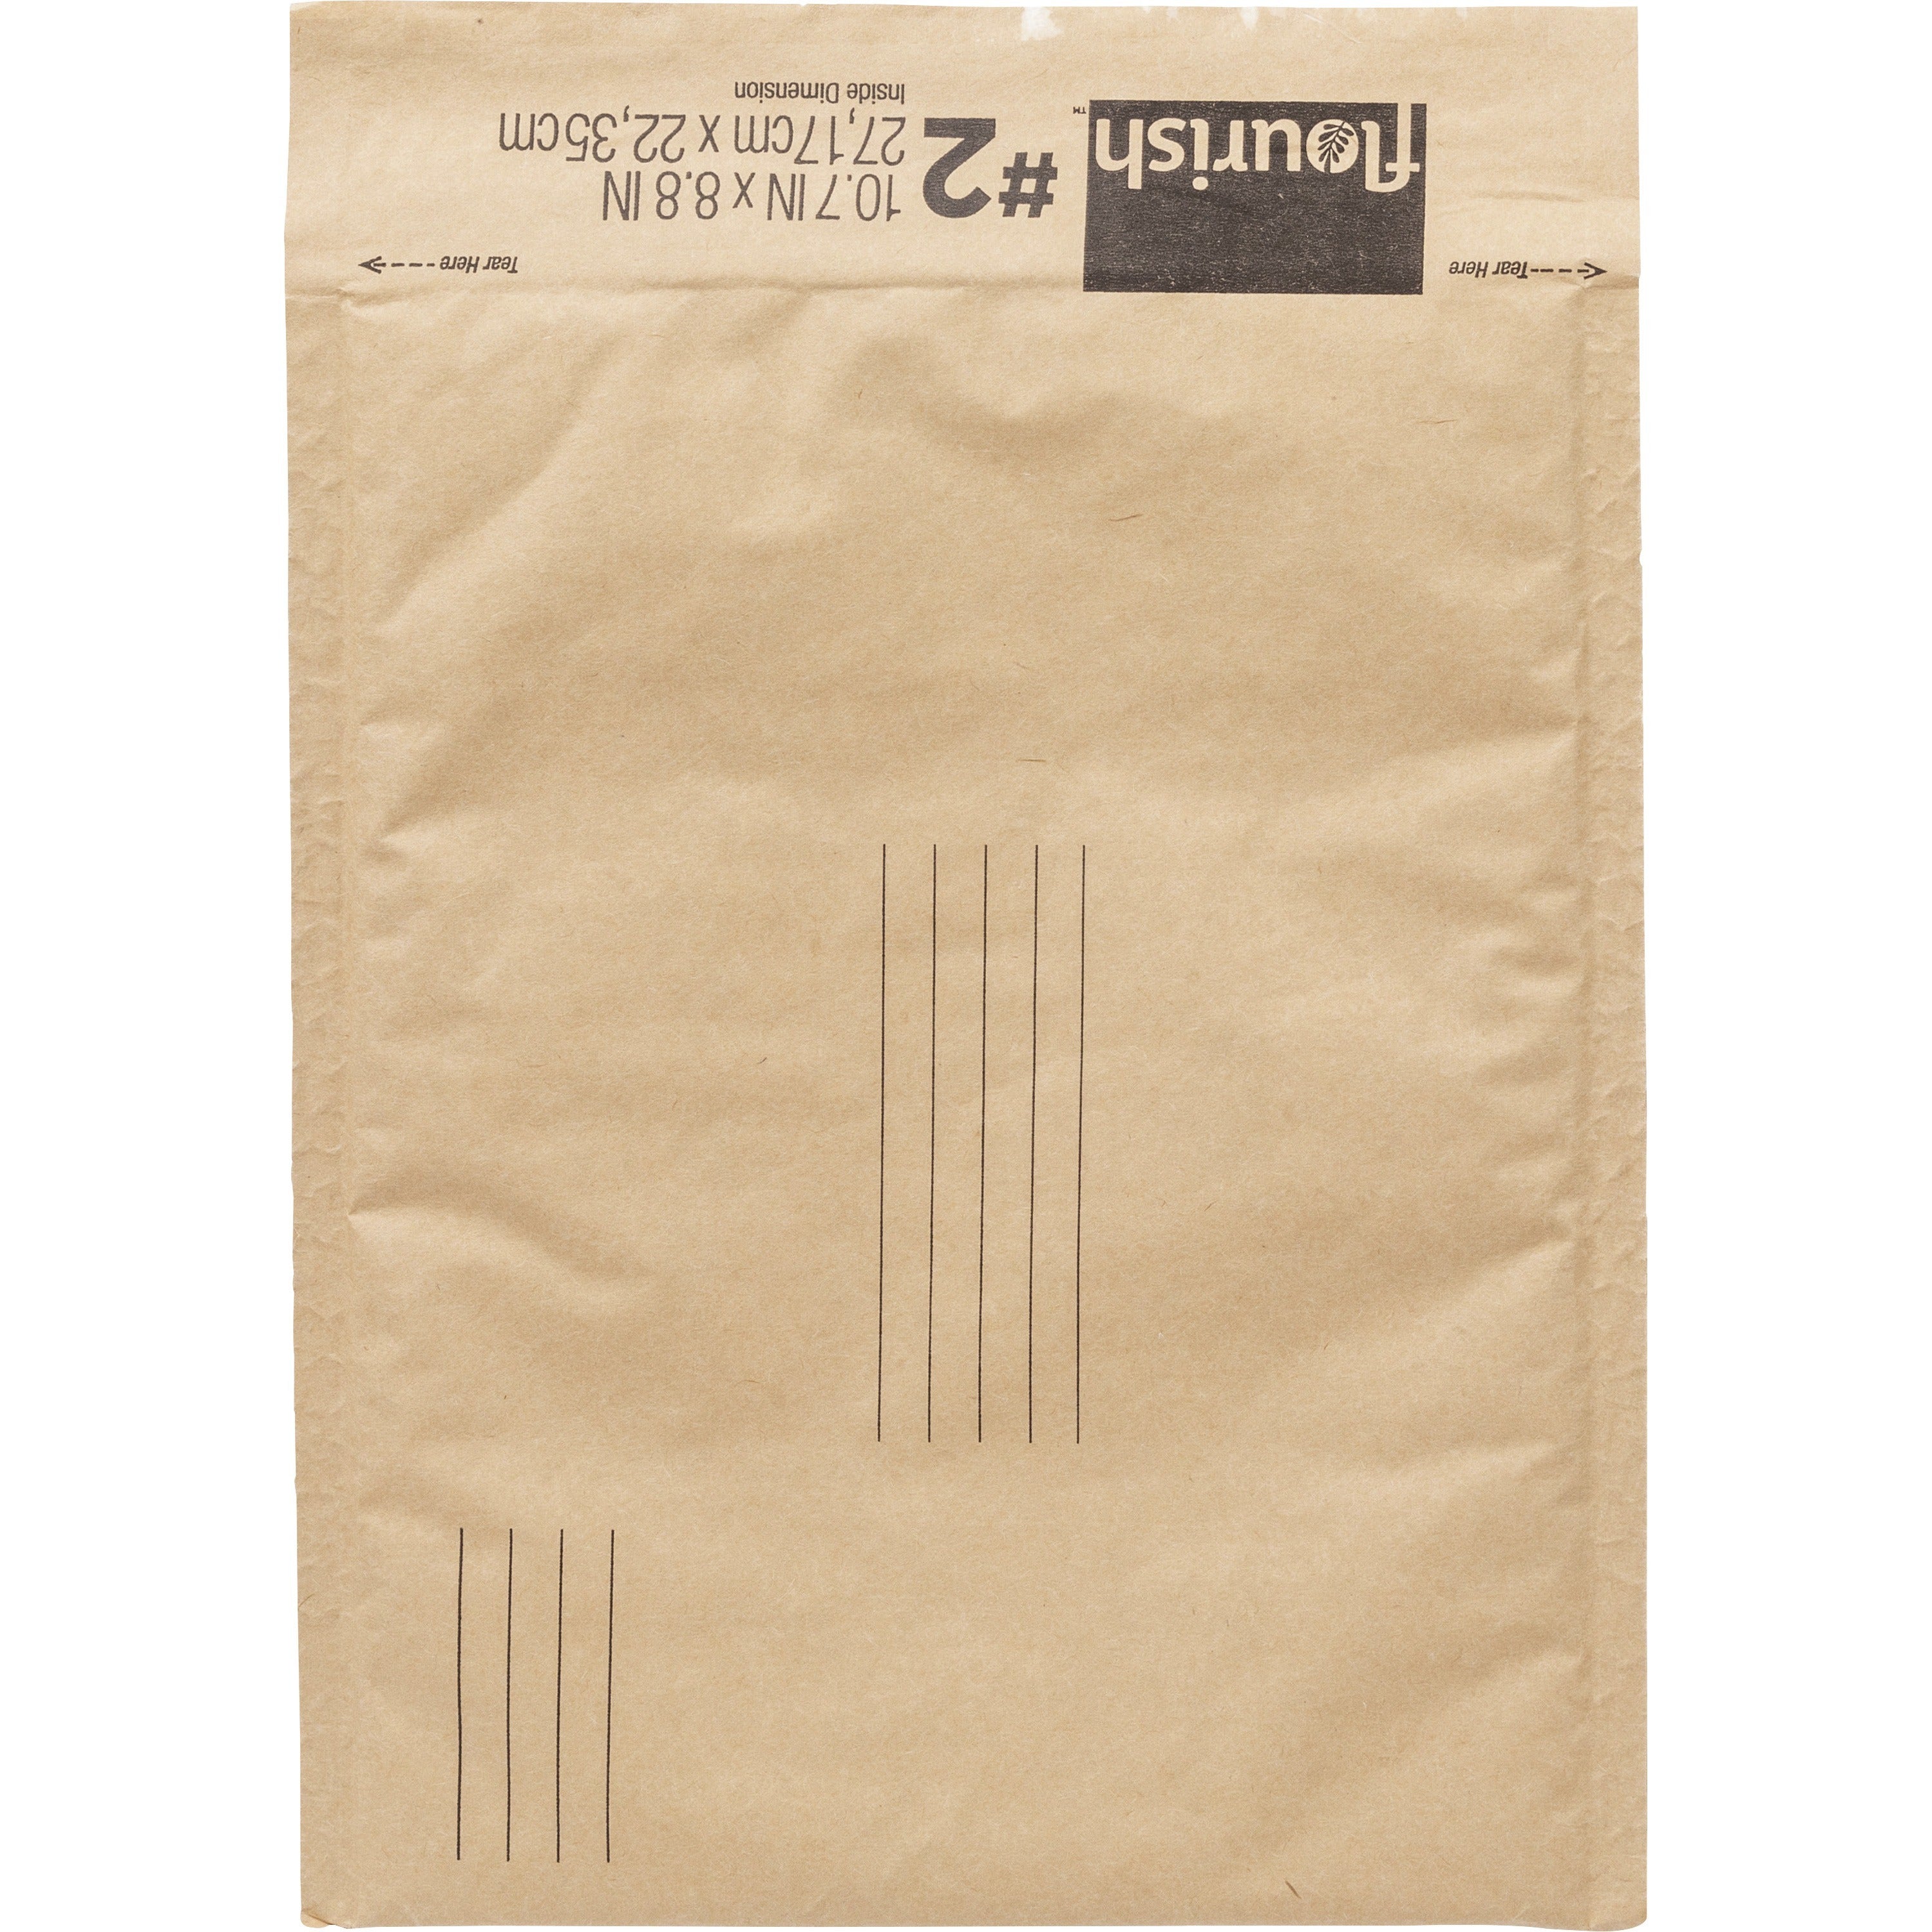 duck-brand-flourish-honeycomb-recyclable-mailers-mailing-shipping-8-4-5-width-x-10-45-64-length-seal-1-each-brown_duc287432 - 2